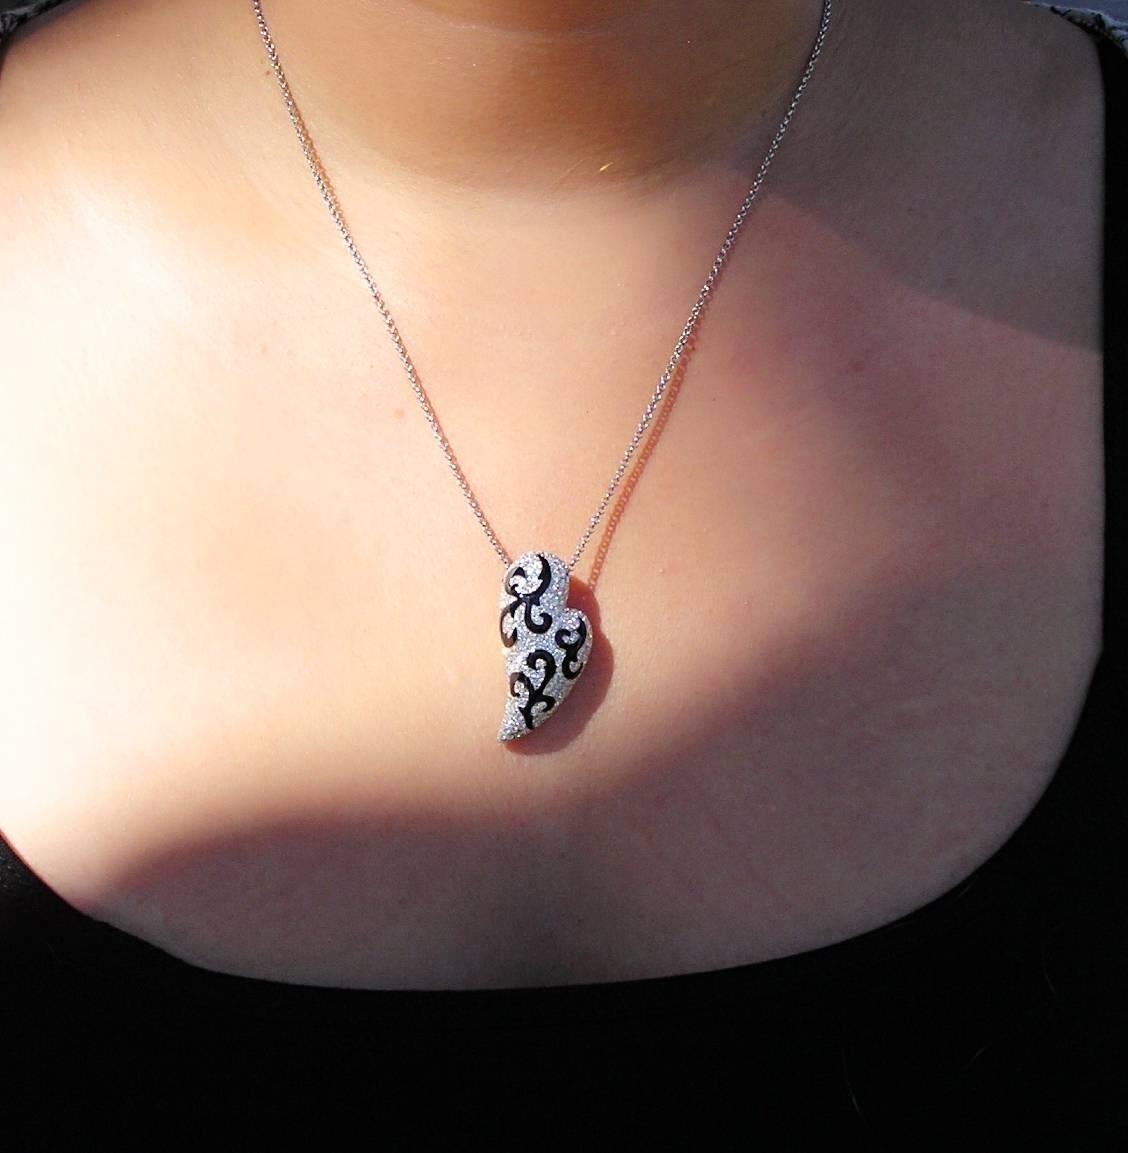 Women's Beautiful Diamond and Enamel Picasso Style Heart Necklace For Sale